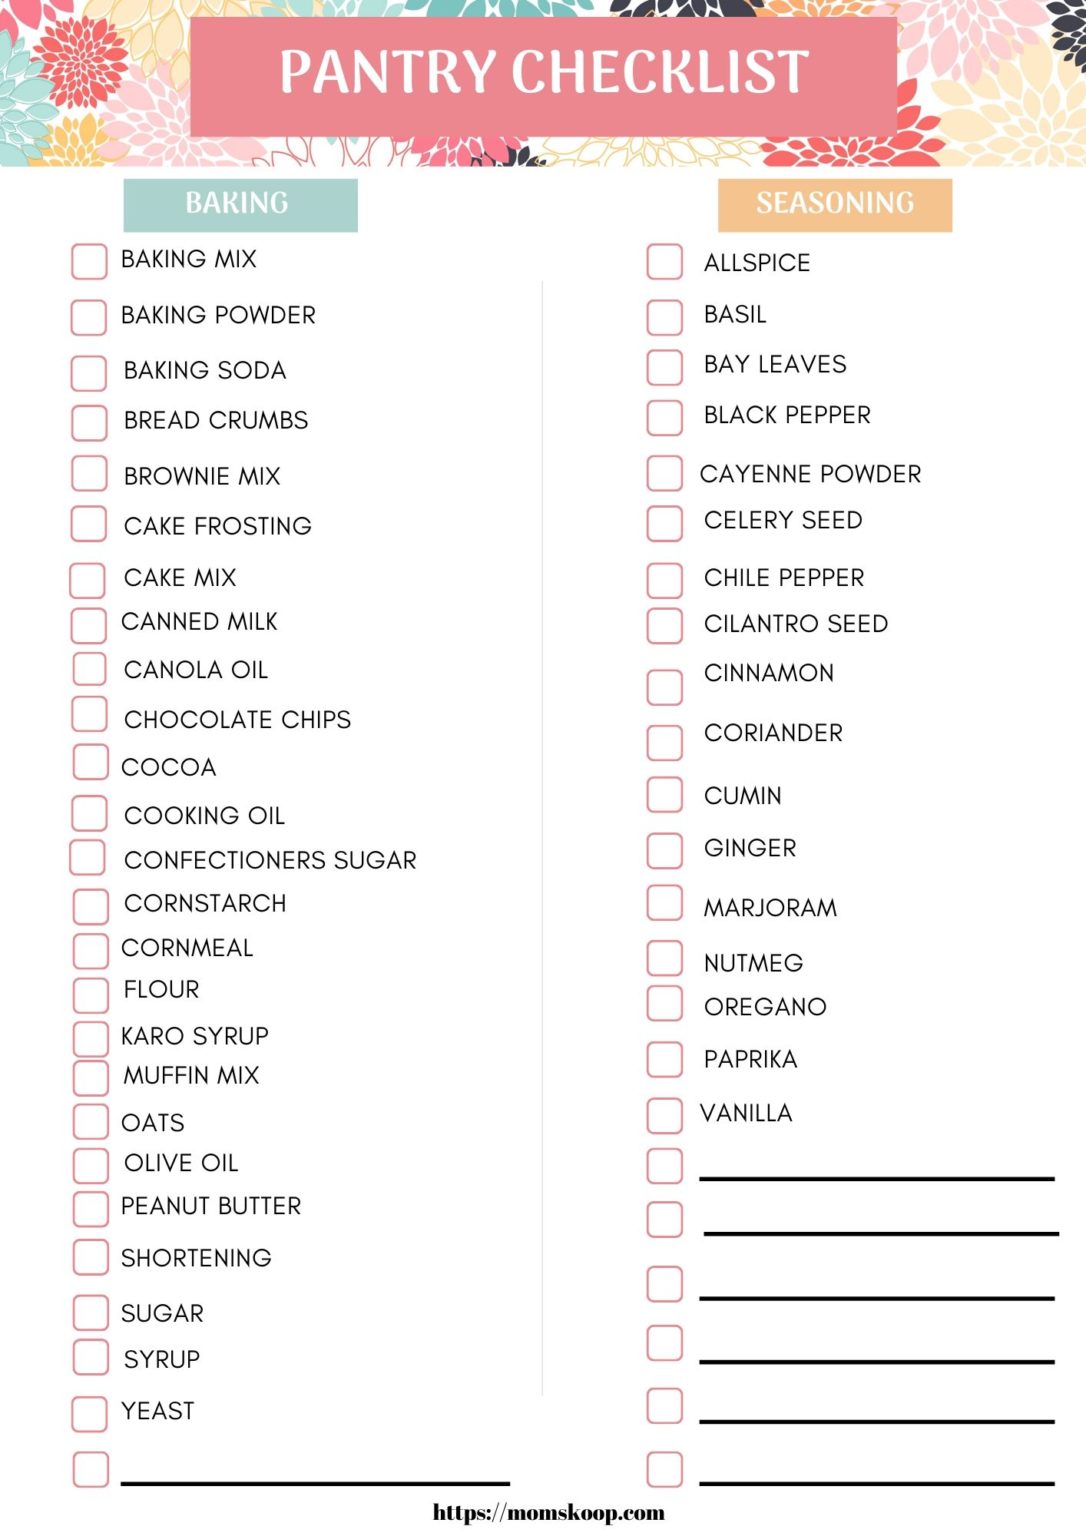 How to Organize a Pantry + FREE Pantry Checklist MomSkoop